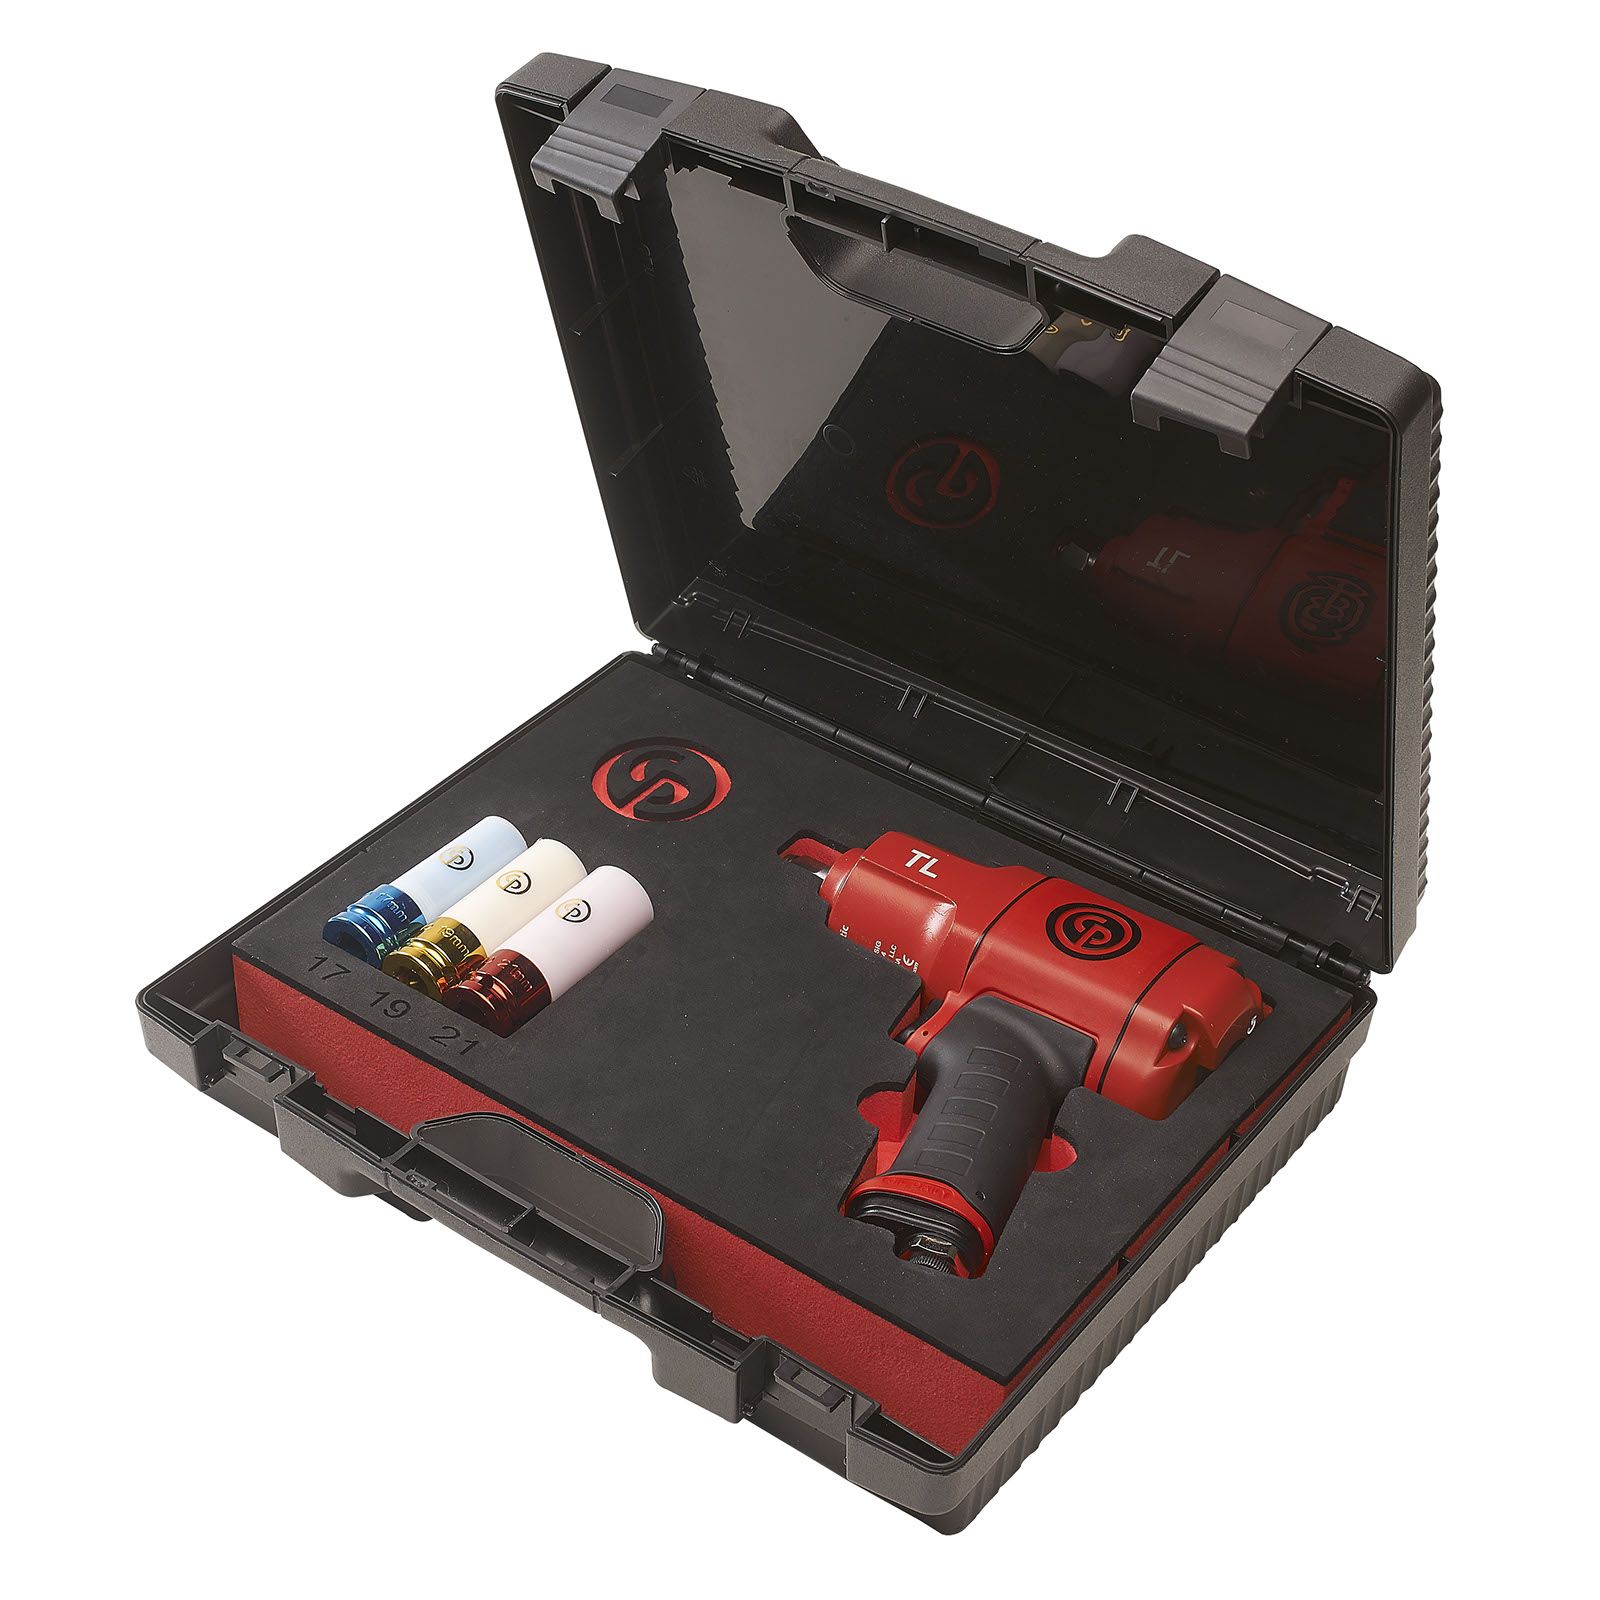 CP7748TL IMPACT WRENCH product photo